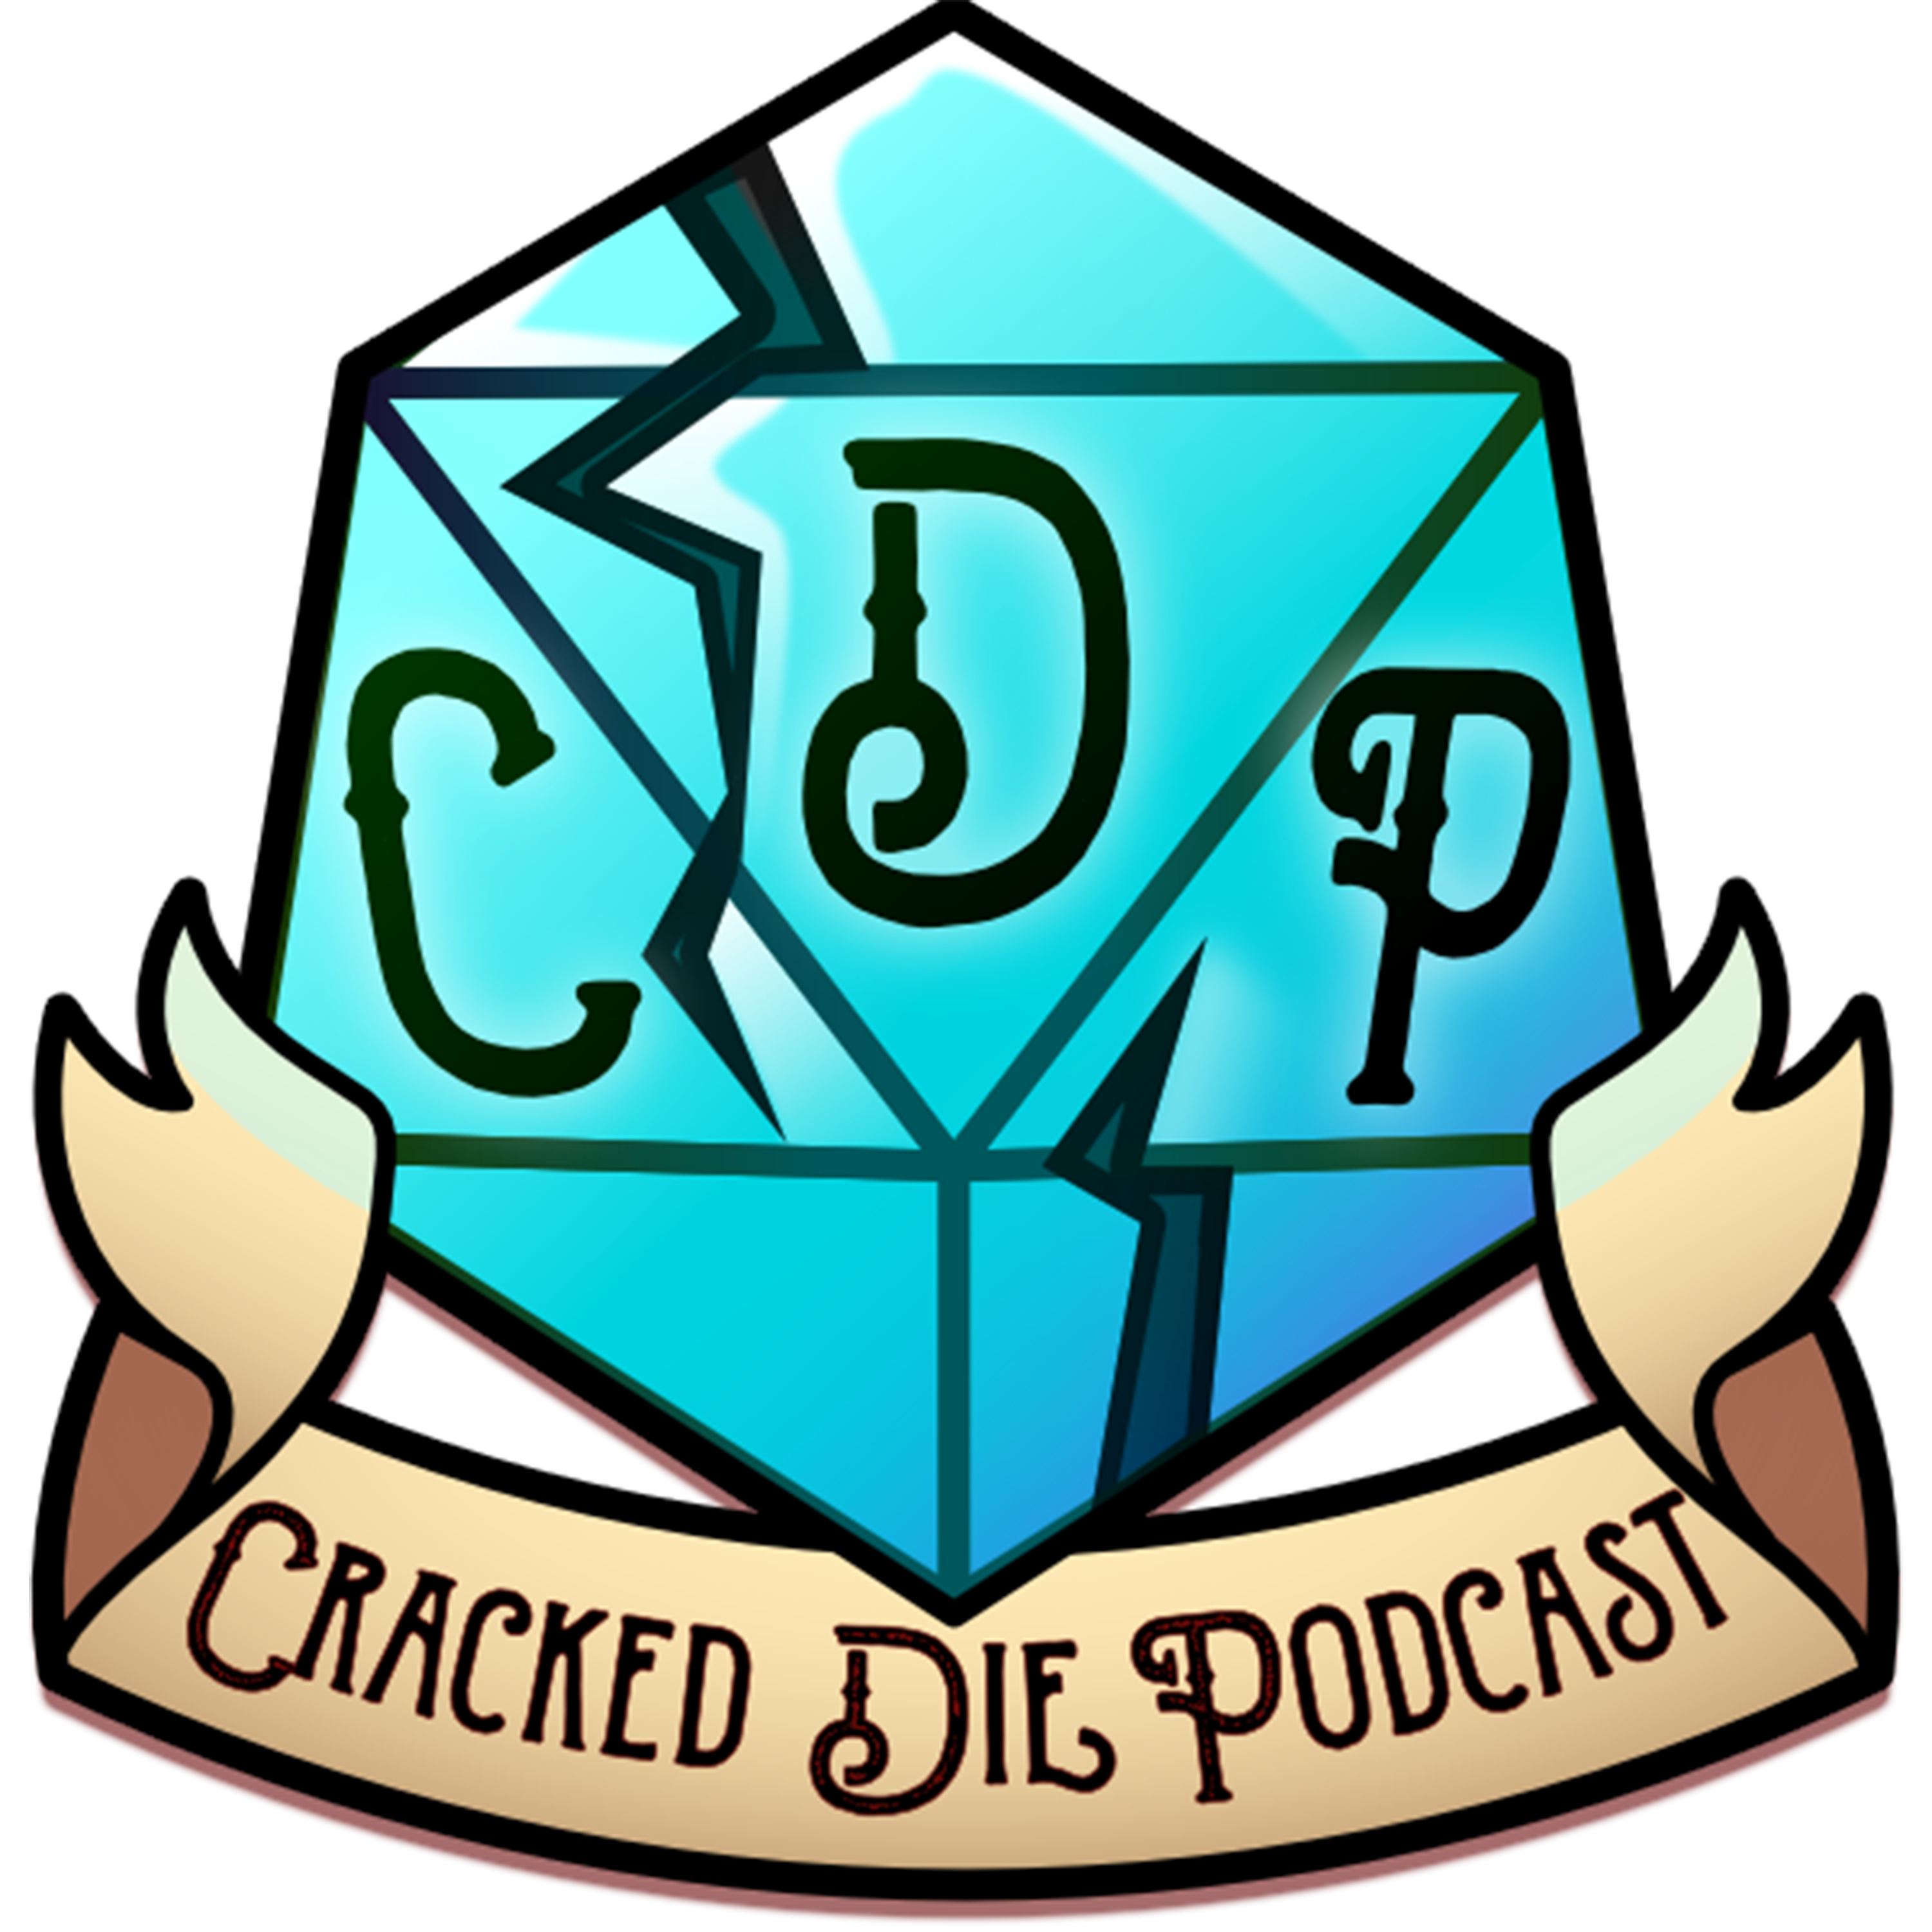 The Cracked Die Podcast - Episode 120 - Stand By Me